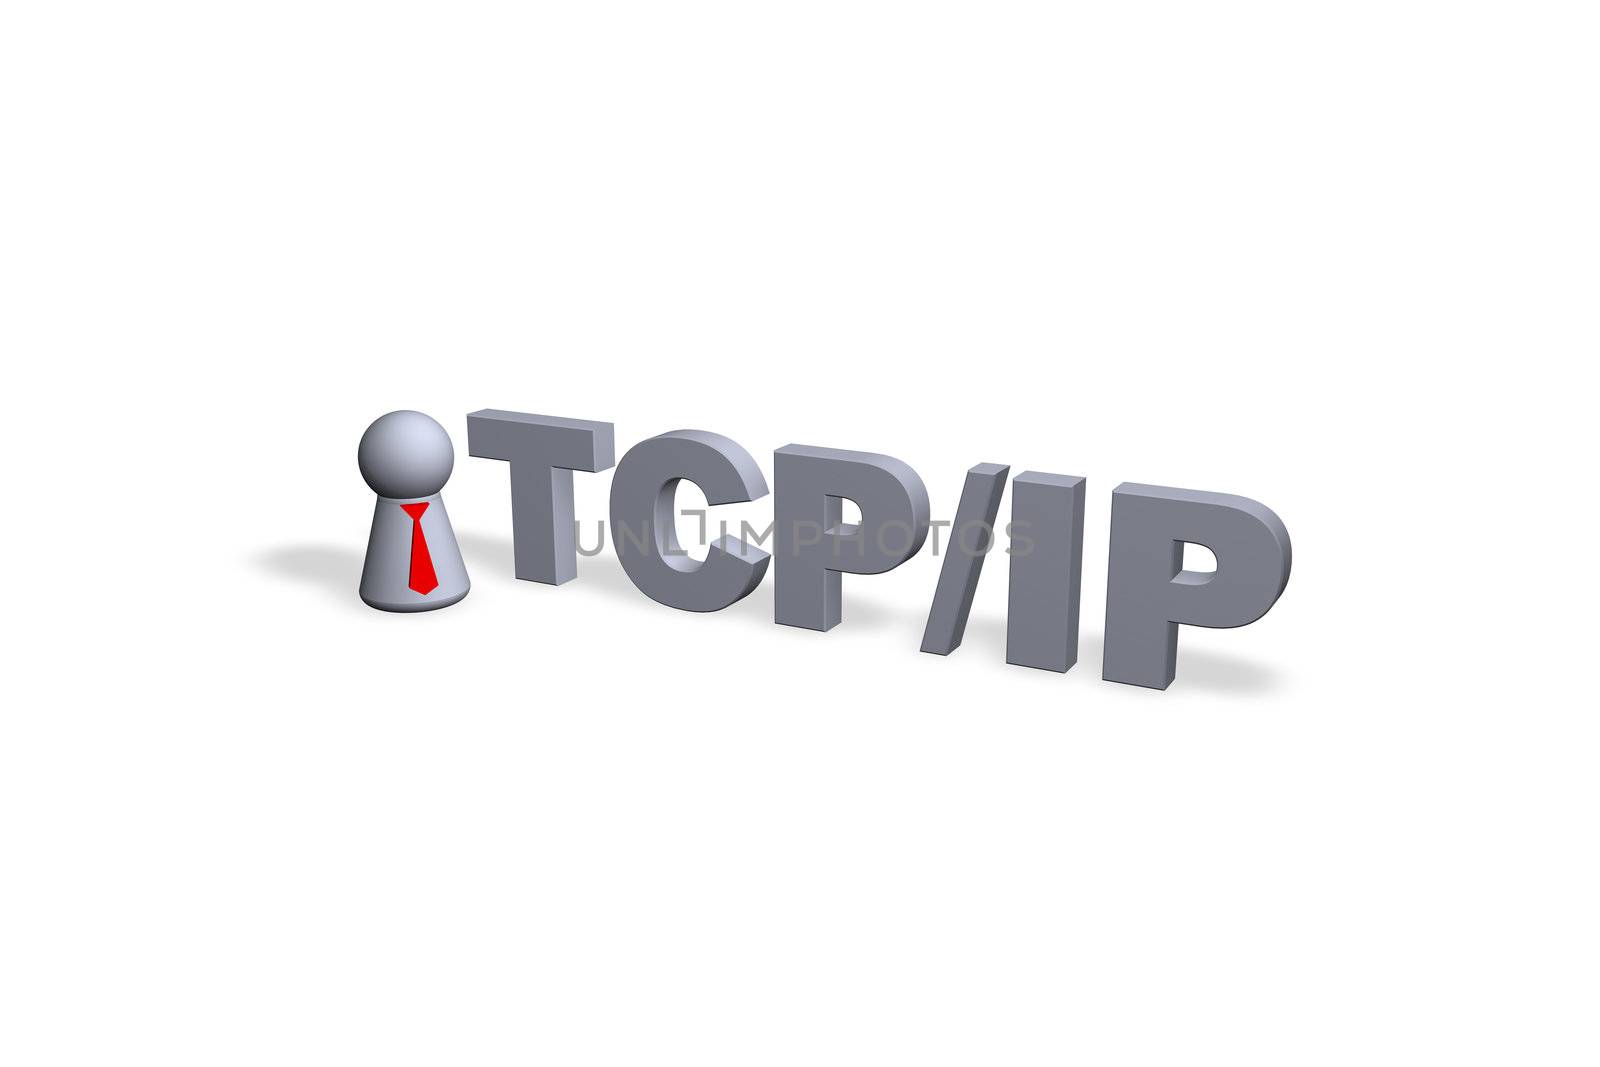 TCP/IP text in 3d and play figure with red tie